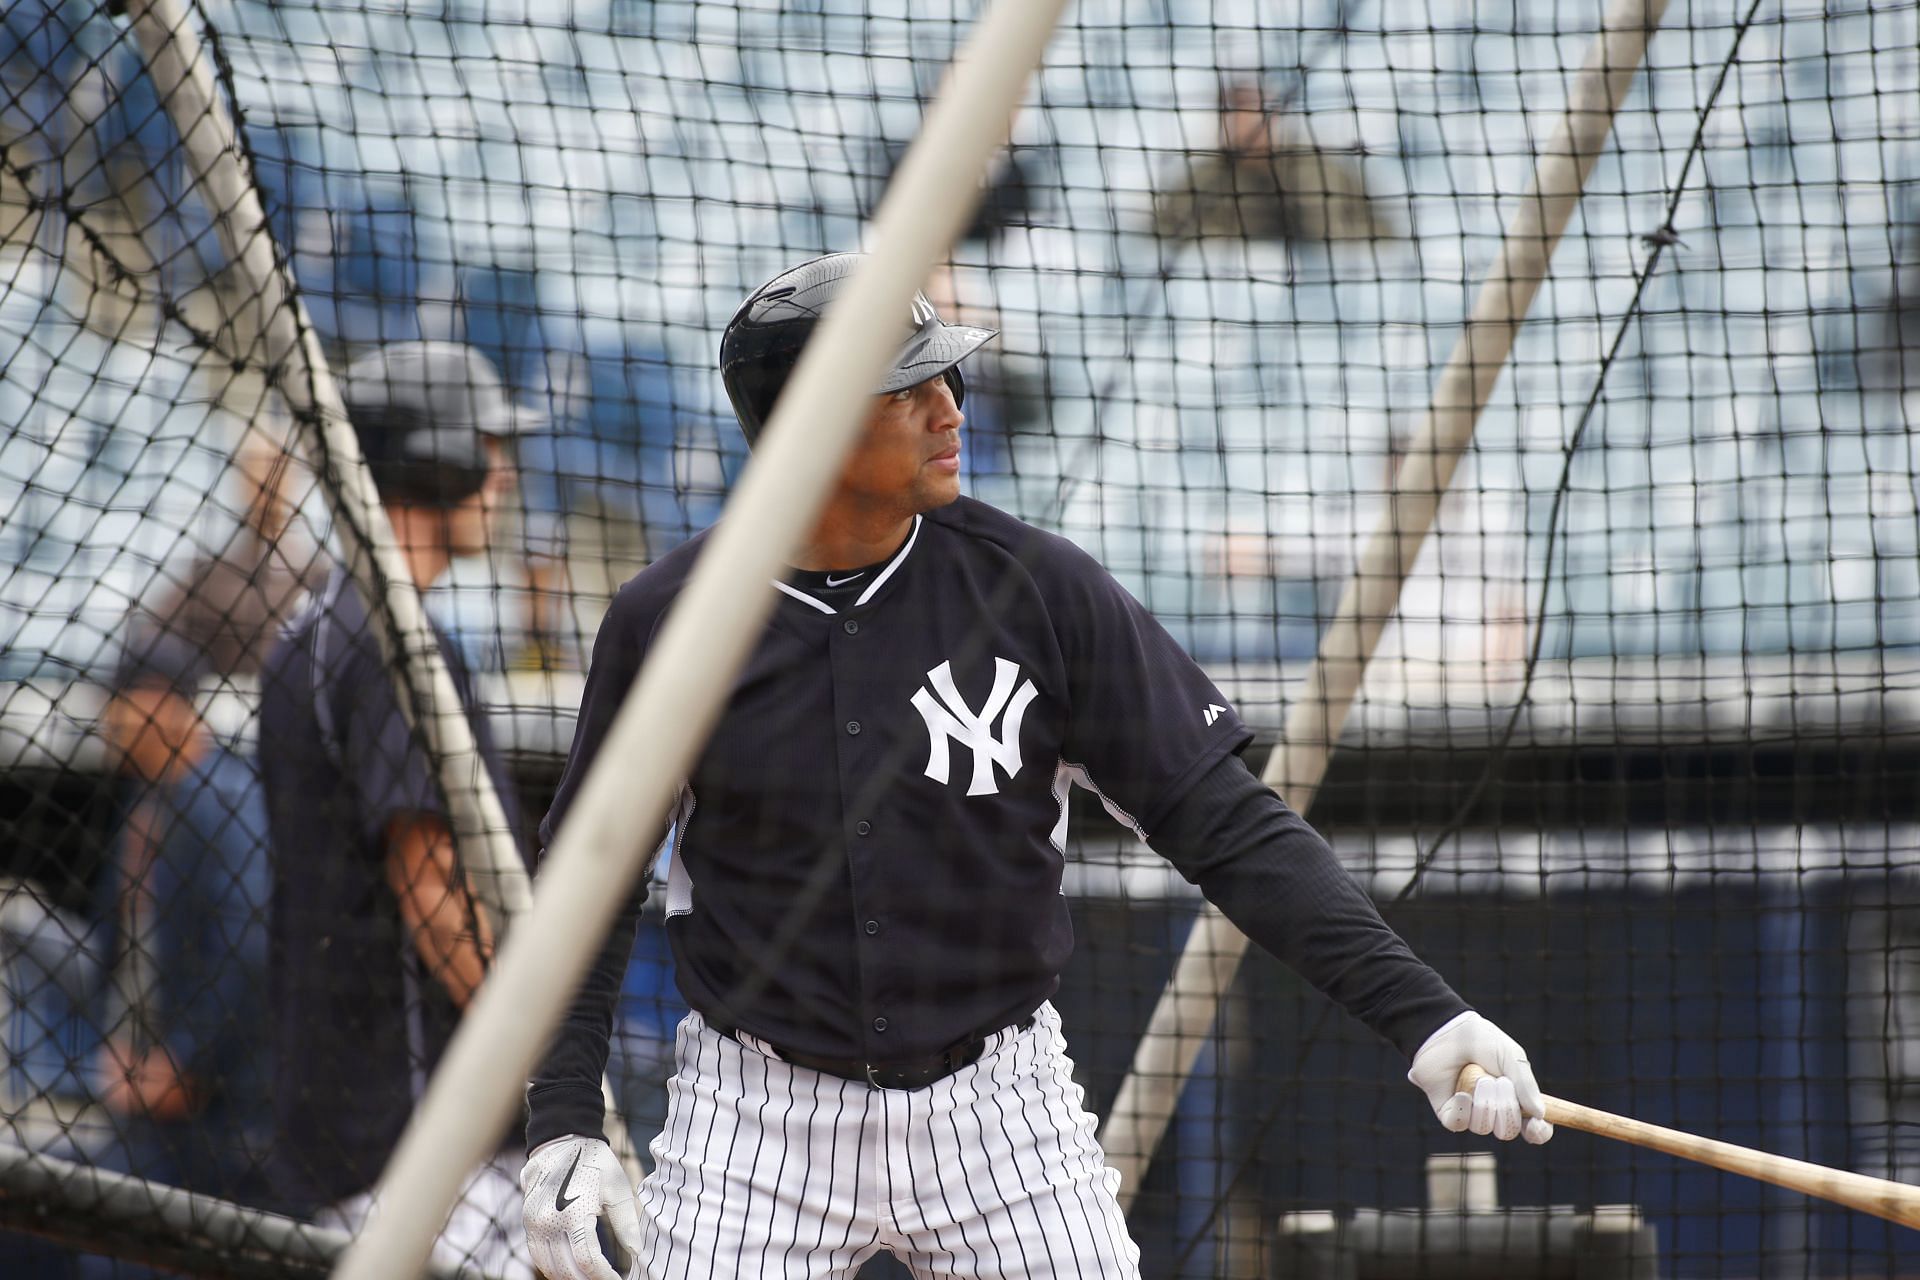 Third baseman Alex Rodriguez #13 of the New York Yankees participates in a spring training workout on February 26, 2015 at George M. Steinbrenner Field in Tampa, Florida.